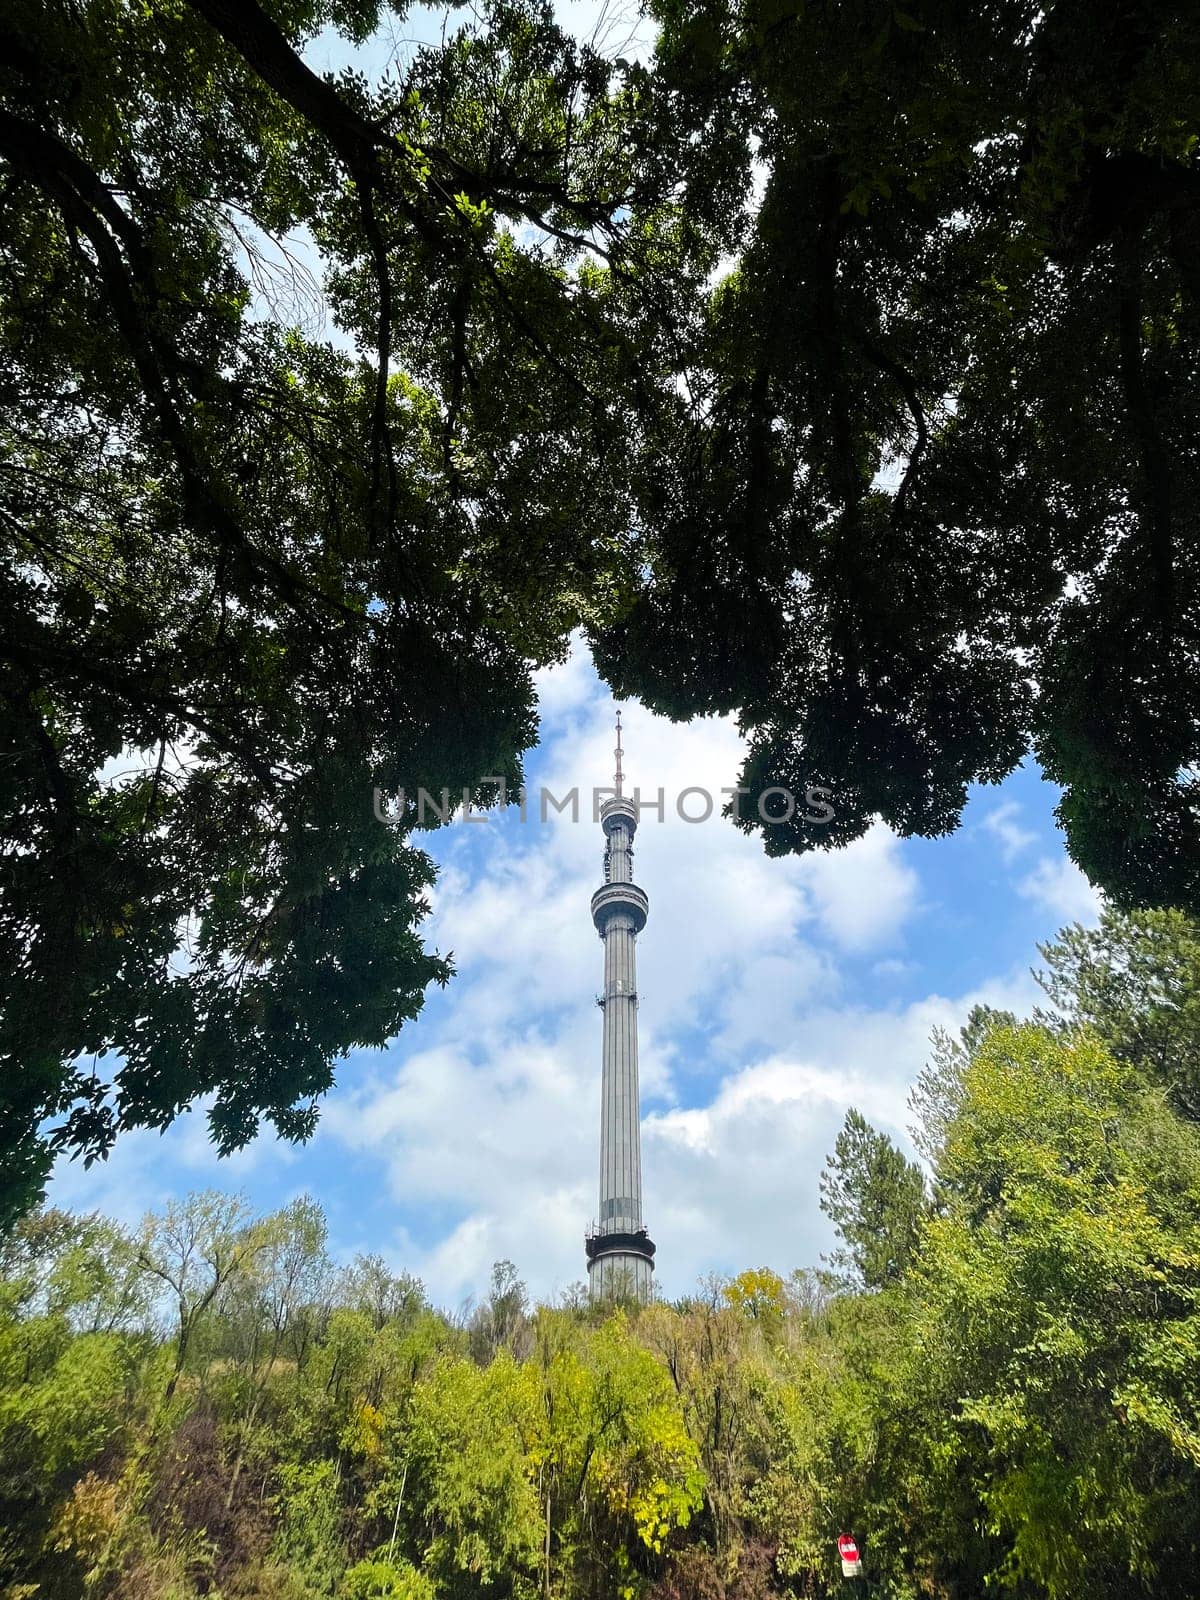 Almaty TV Tower view through the trees in summer.